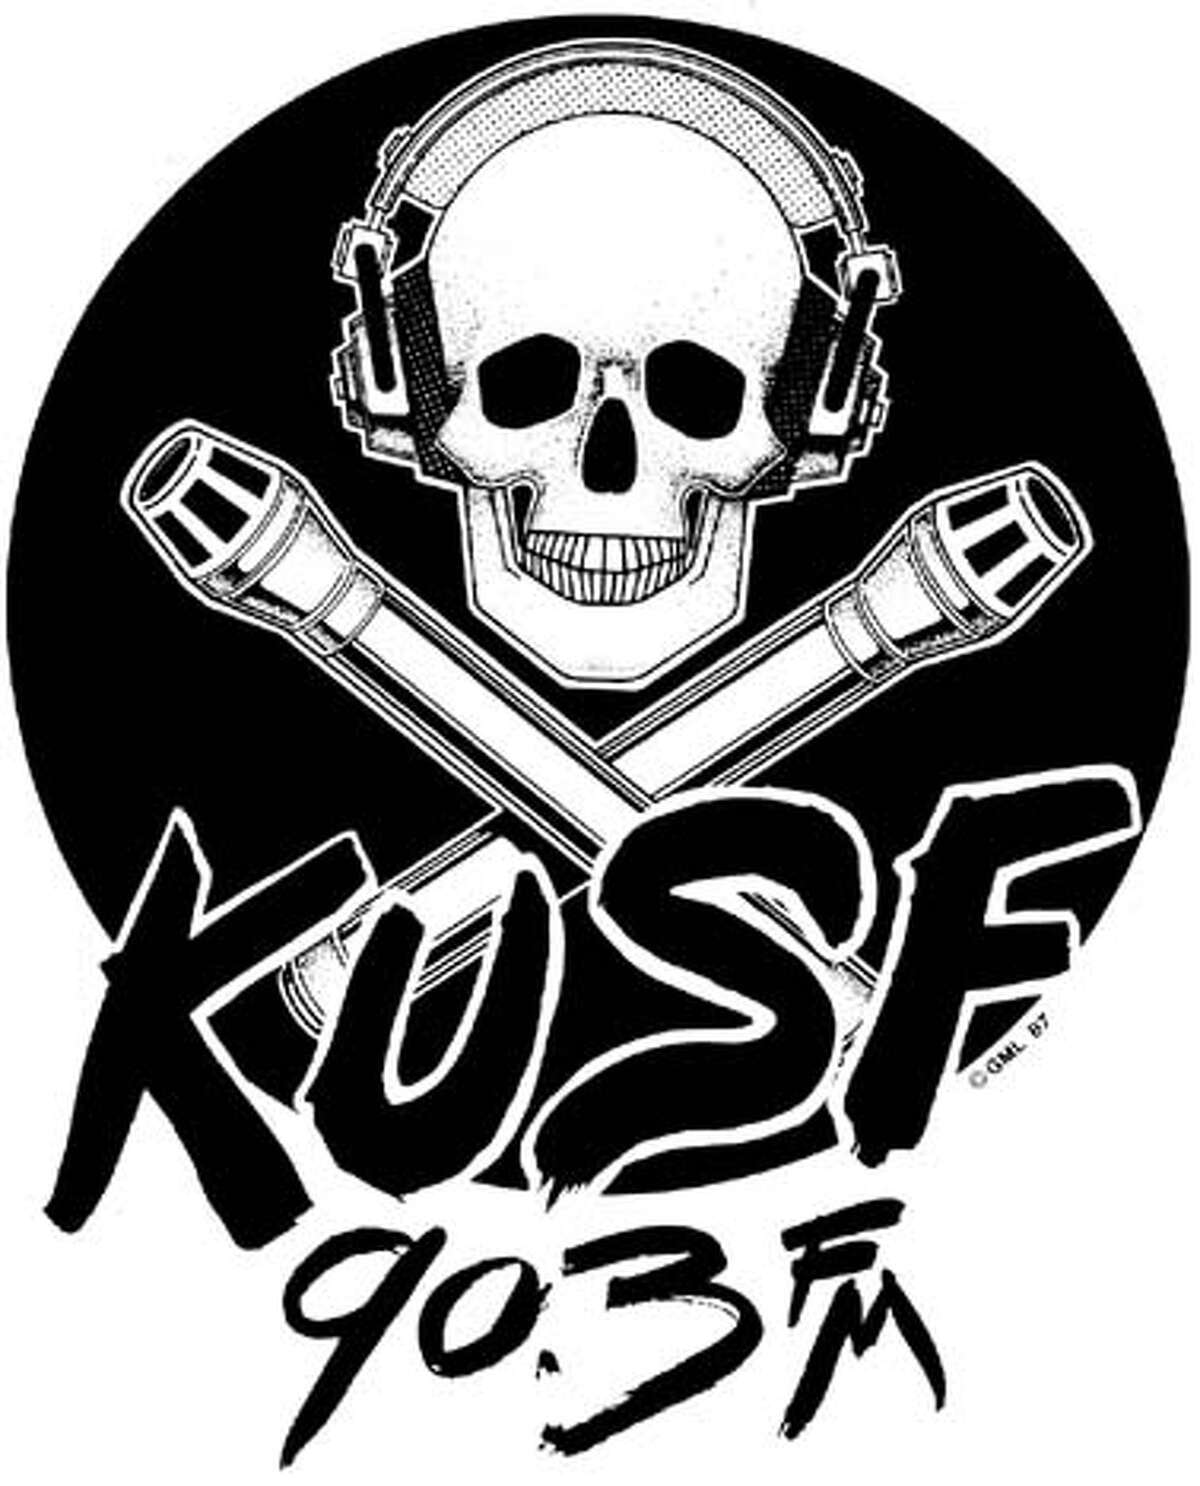 KUSF's distinctive logo has shown up in the most unlikely places, all over the world.